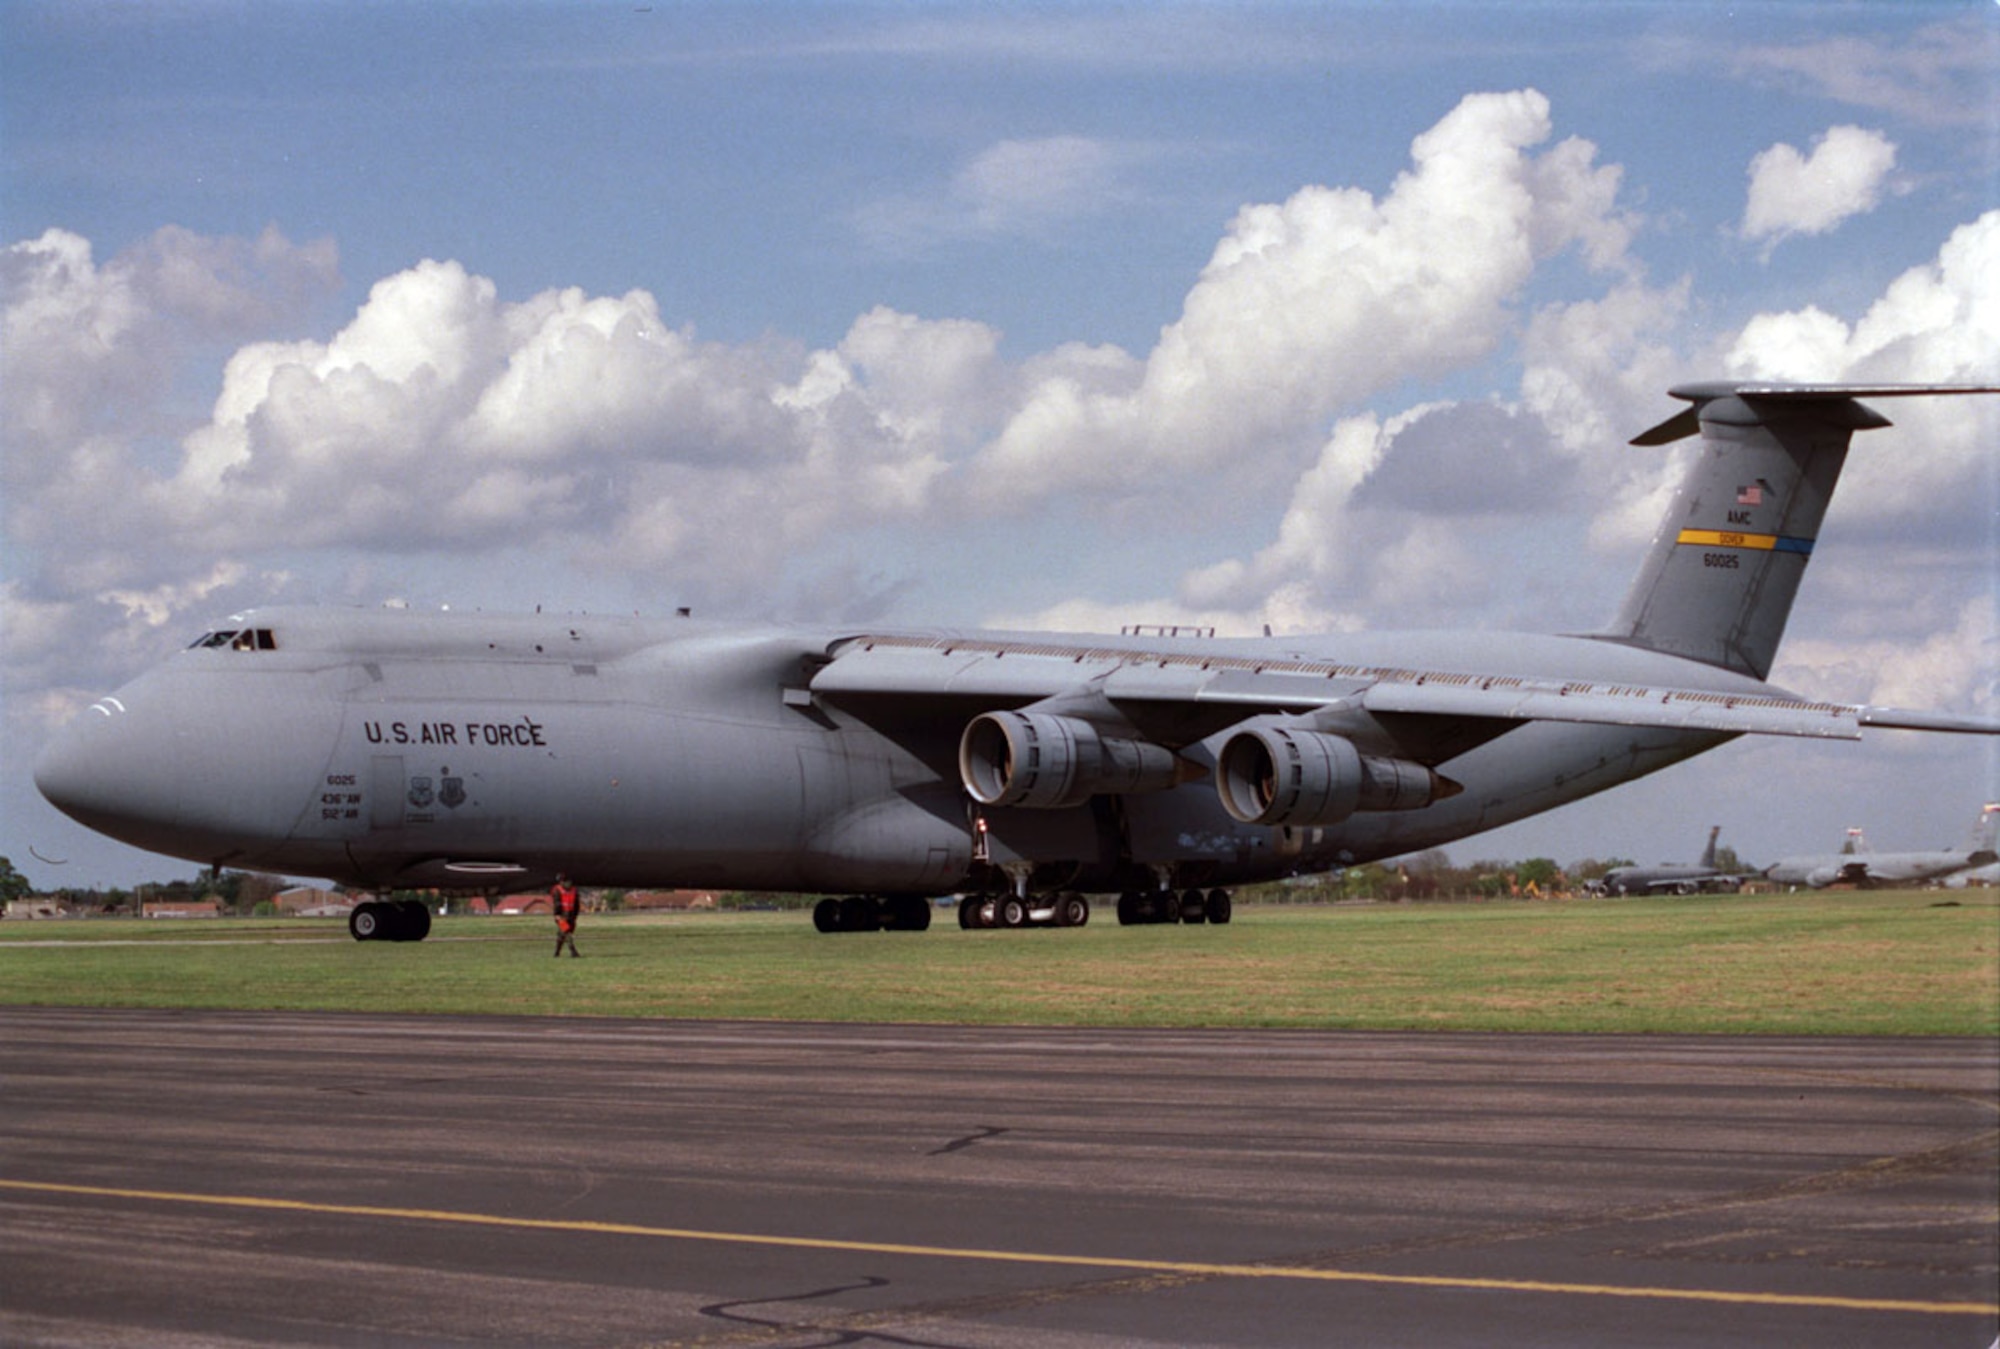 ROYAL AIR FORCE, MILDENHALL, England -- A Force C-5 Galaxy arrives at here, April 22, 1999. The C-5 is delivering four fuel trucks to help the fuels management flight of the 100th Supply Squadron keep up with the increasing demand to fuel more KC-135R Stratotankers for Operation Allied Force. (U.S. Air Force photo by Tech. Sgt. Brad Fallin)